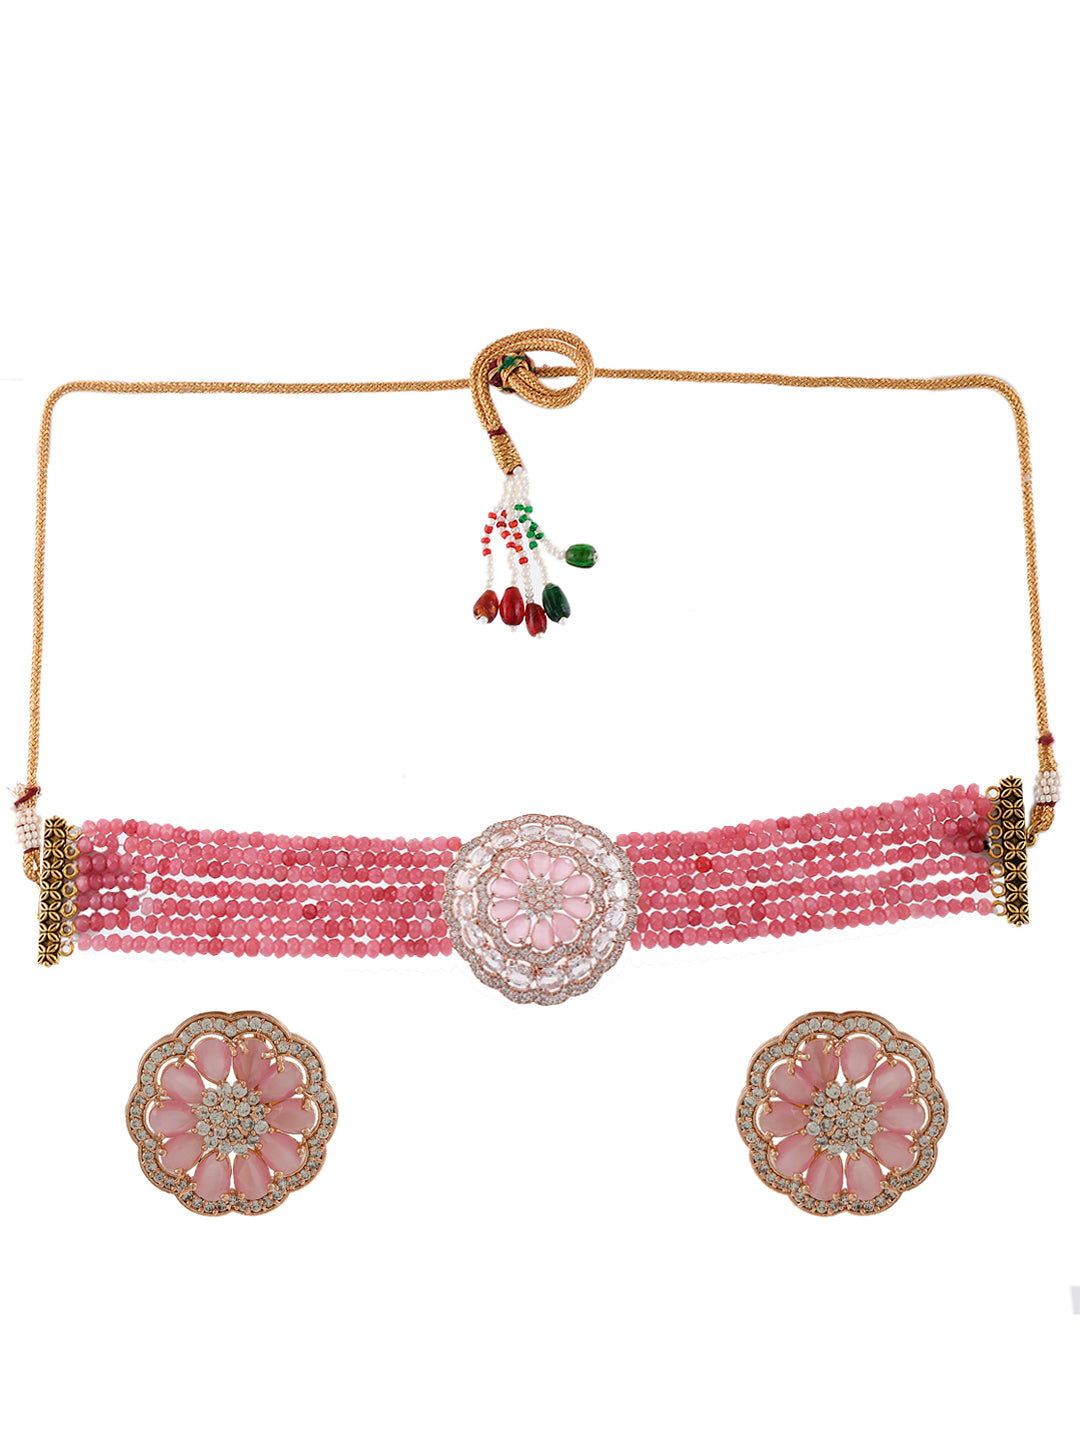 Rose Pink Gold Choker Necklace Set With Earring For Women Girls